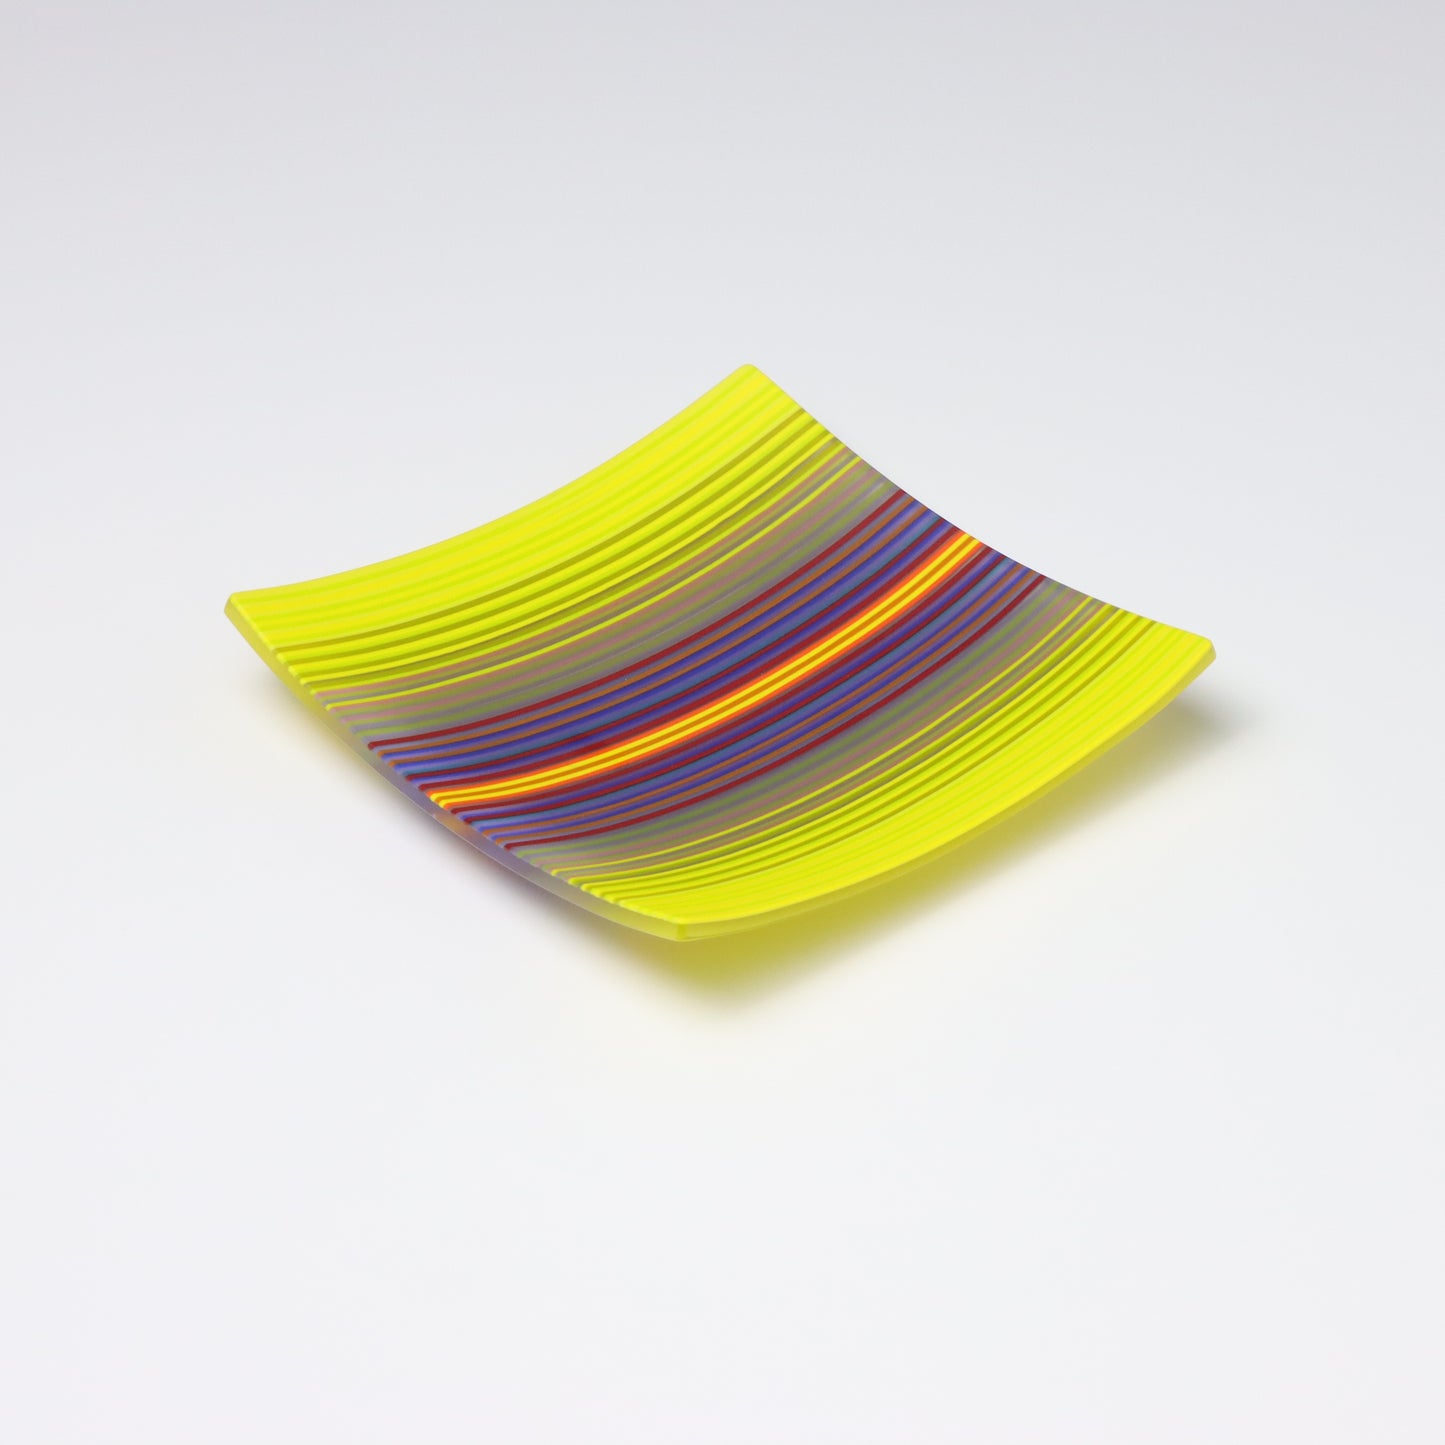 A decorative square shallow glass plate with raised corners and a  colourful ColourWave stripe patterns showing key colours of yellow, and purple, blue  and red.